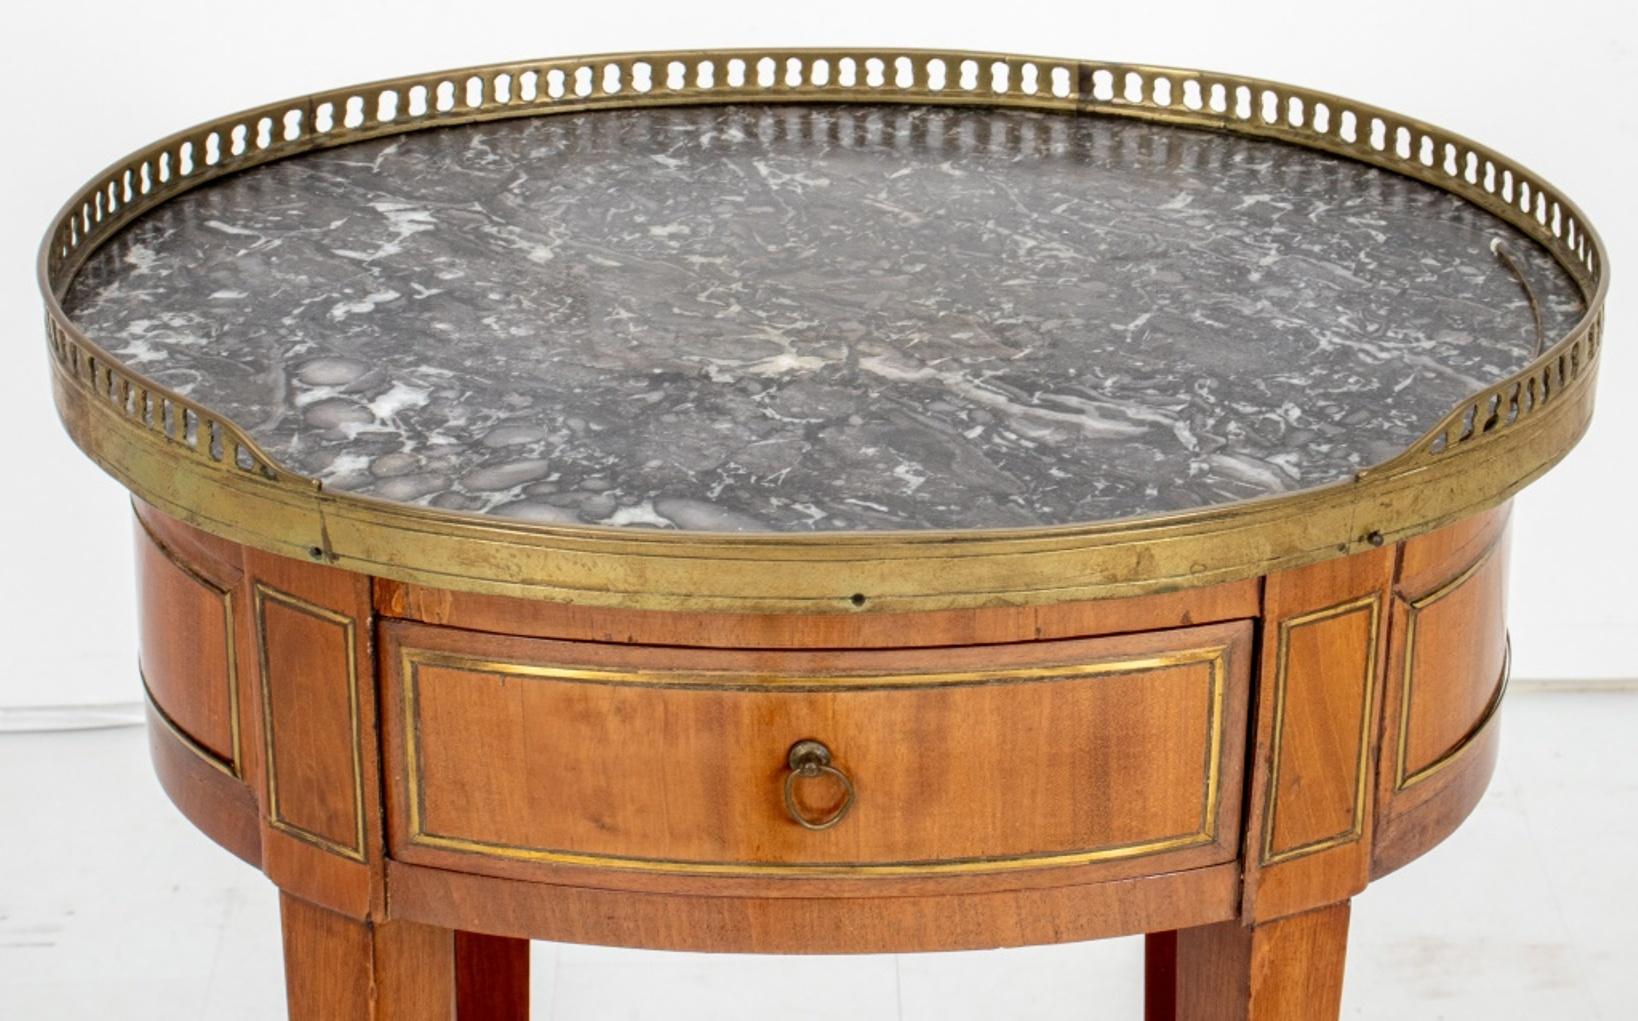 Louis XVI oval brass-mounted mahogany table, 18th C and later, apparently unmarked, the galleried oval fossilized marble top above paneled apron with one short drawer above four tapering square legs conjoined by a conforming tier. 

Dealer: S138XX